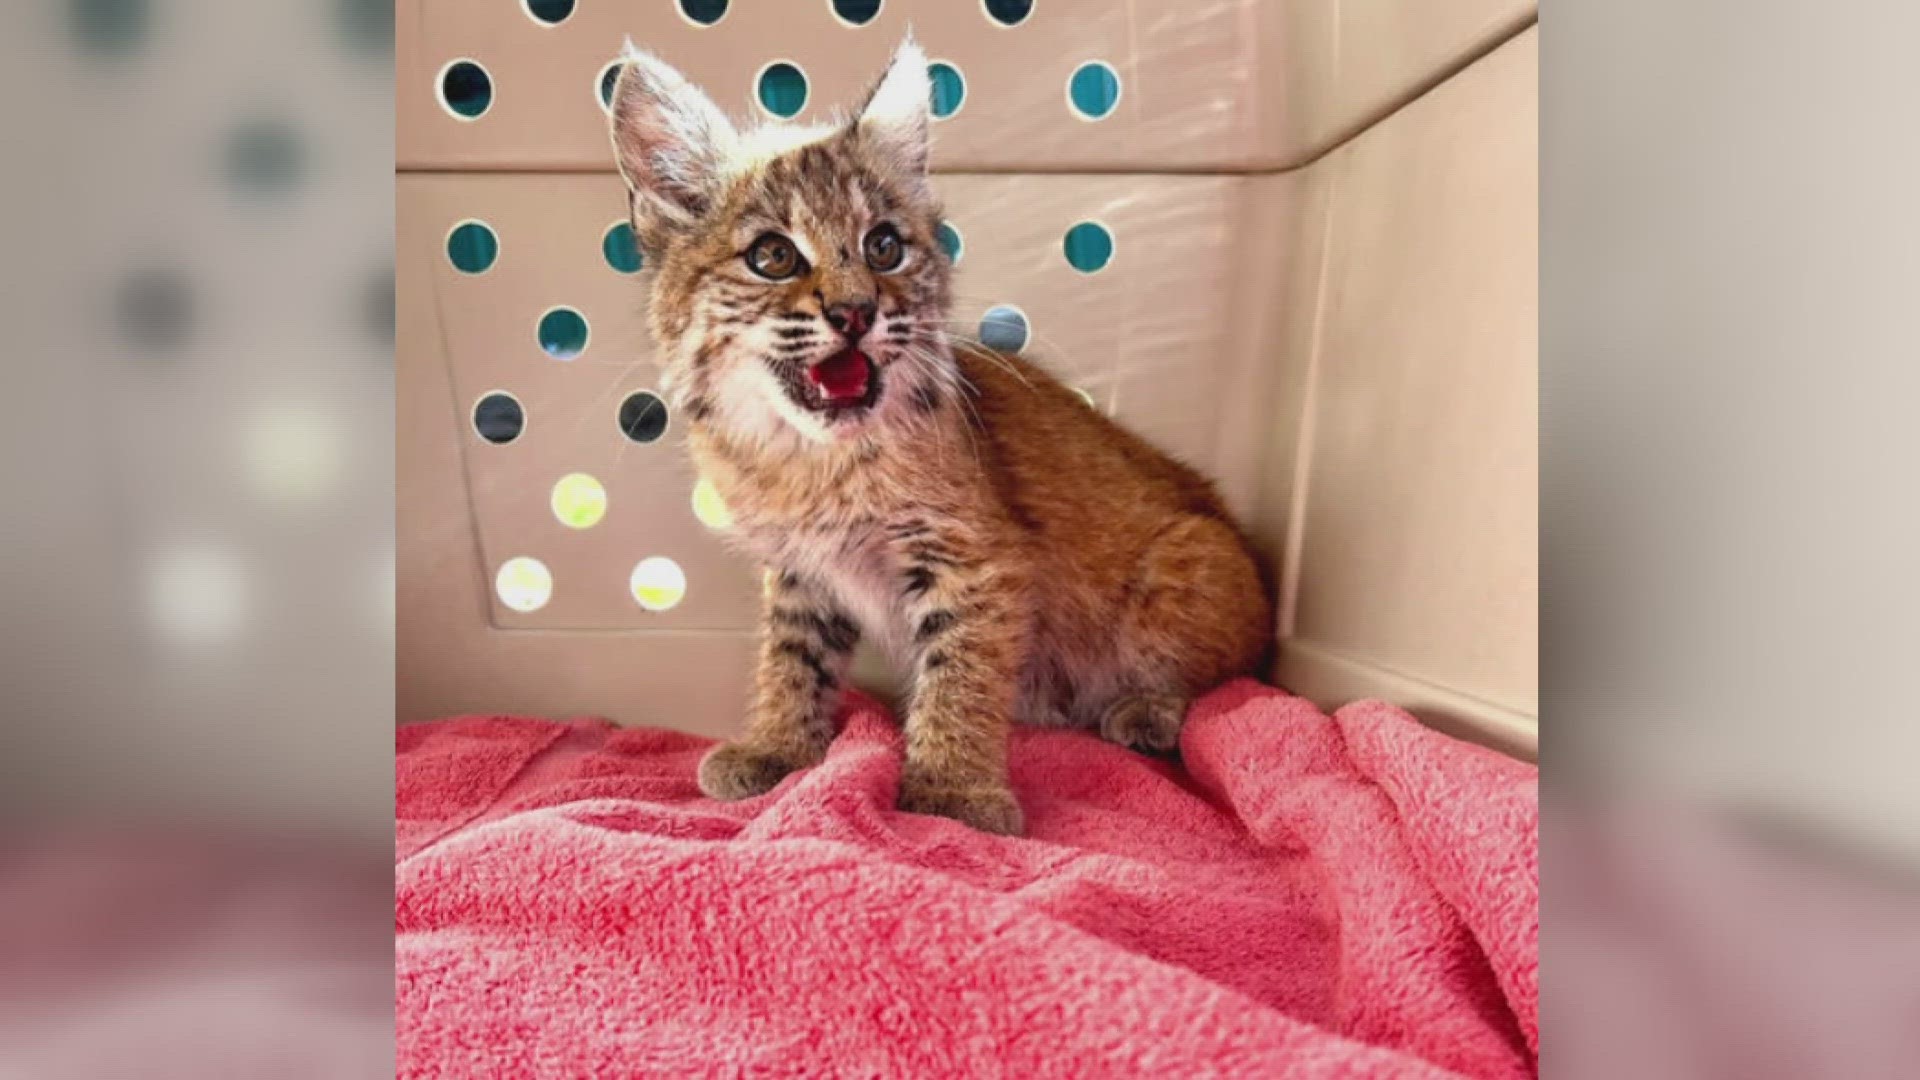 A Longmont wildlife center is caring for the bobcat kittens after their mother was killed.